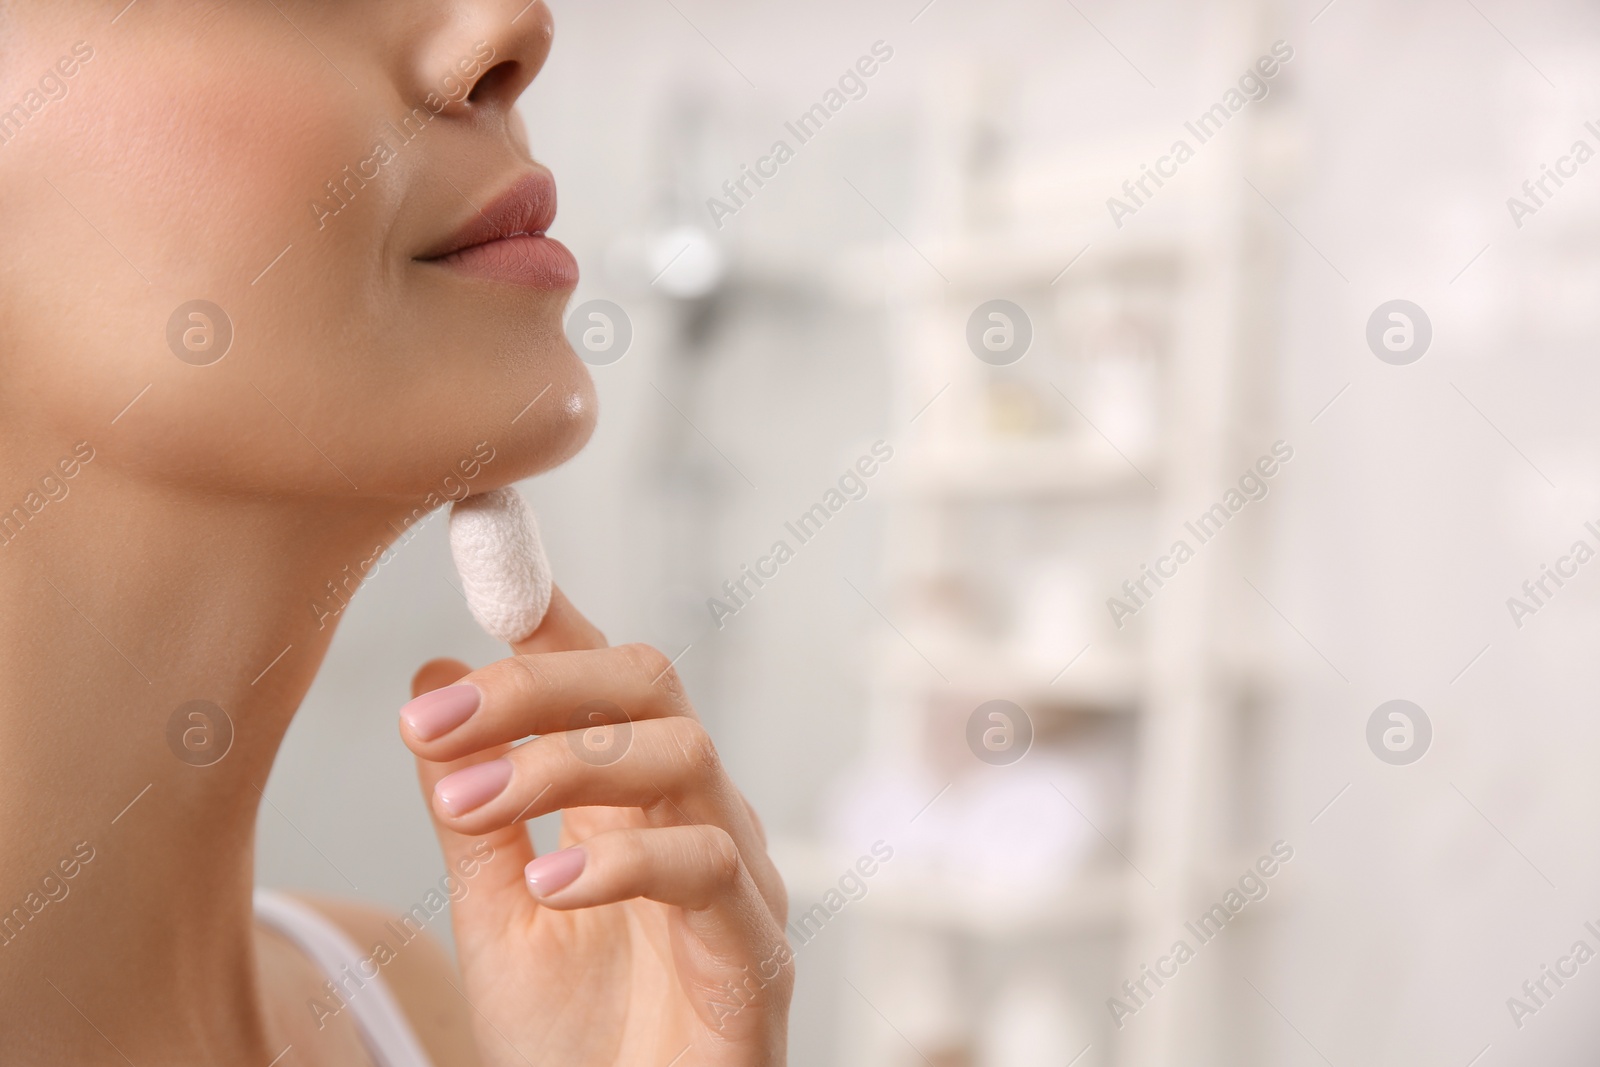 Photo of Woman using silkworm cocoon in skin care routine at home, closeup. Space for text